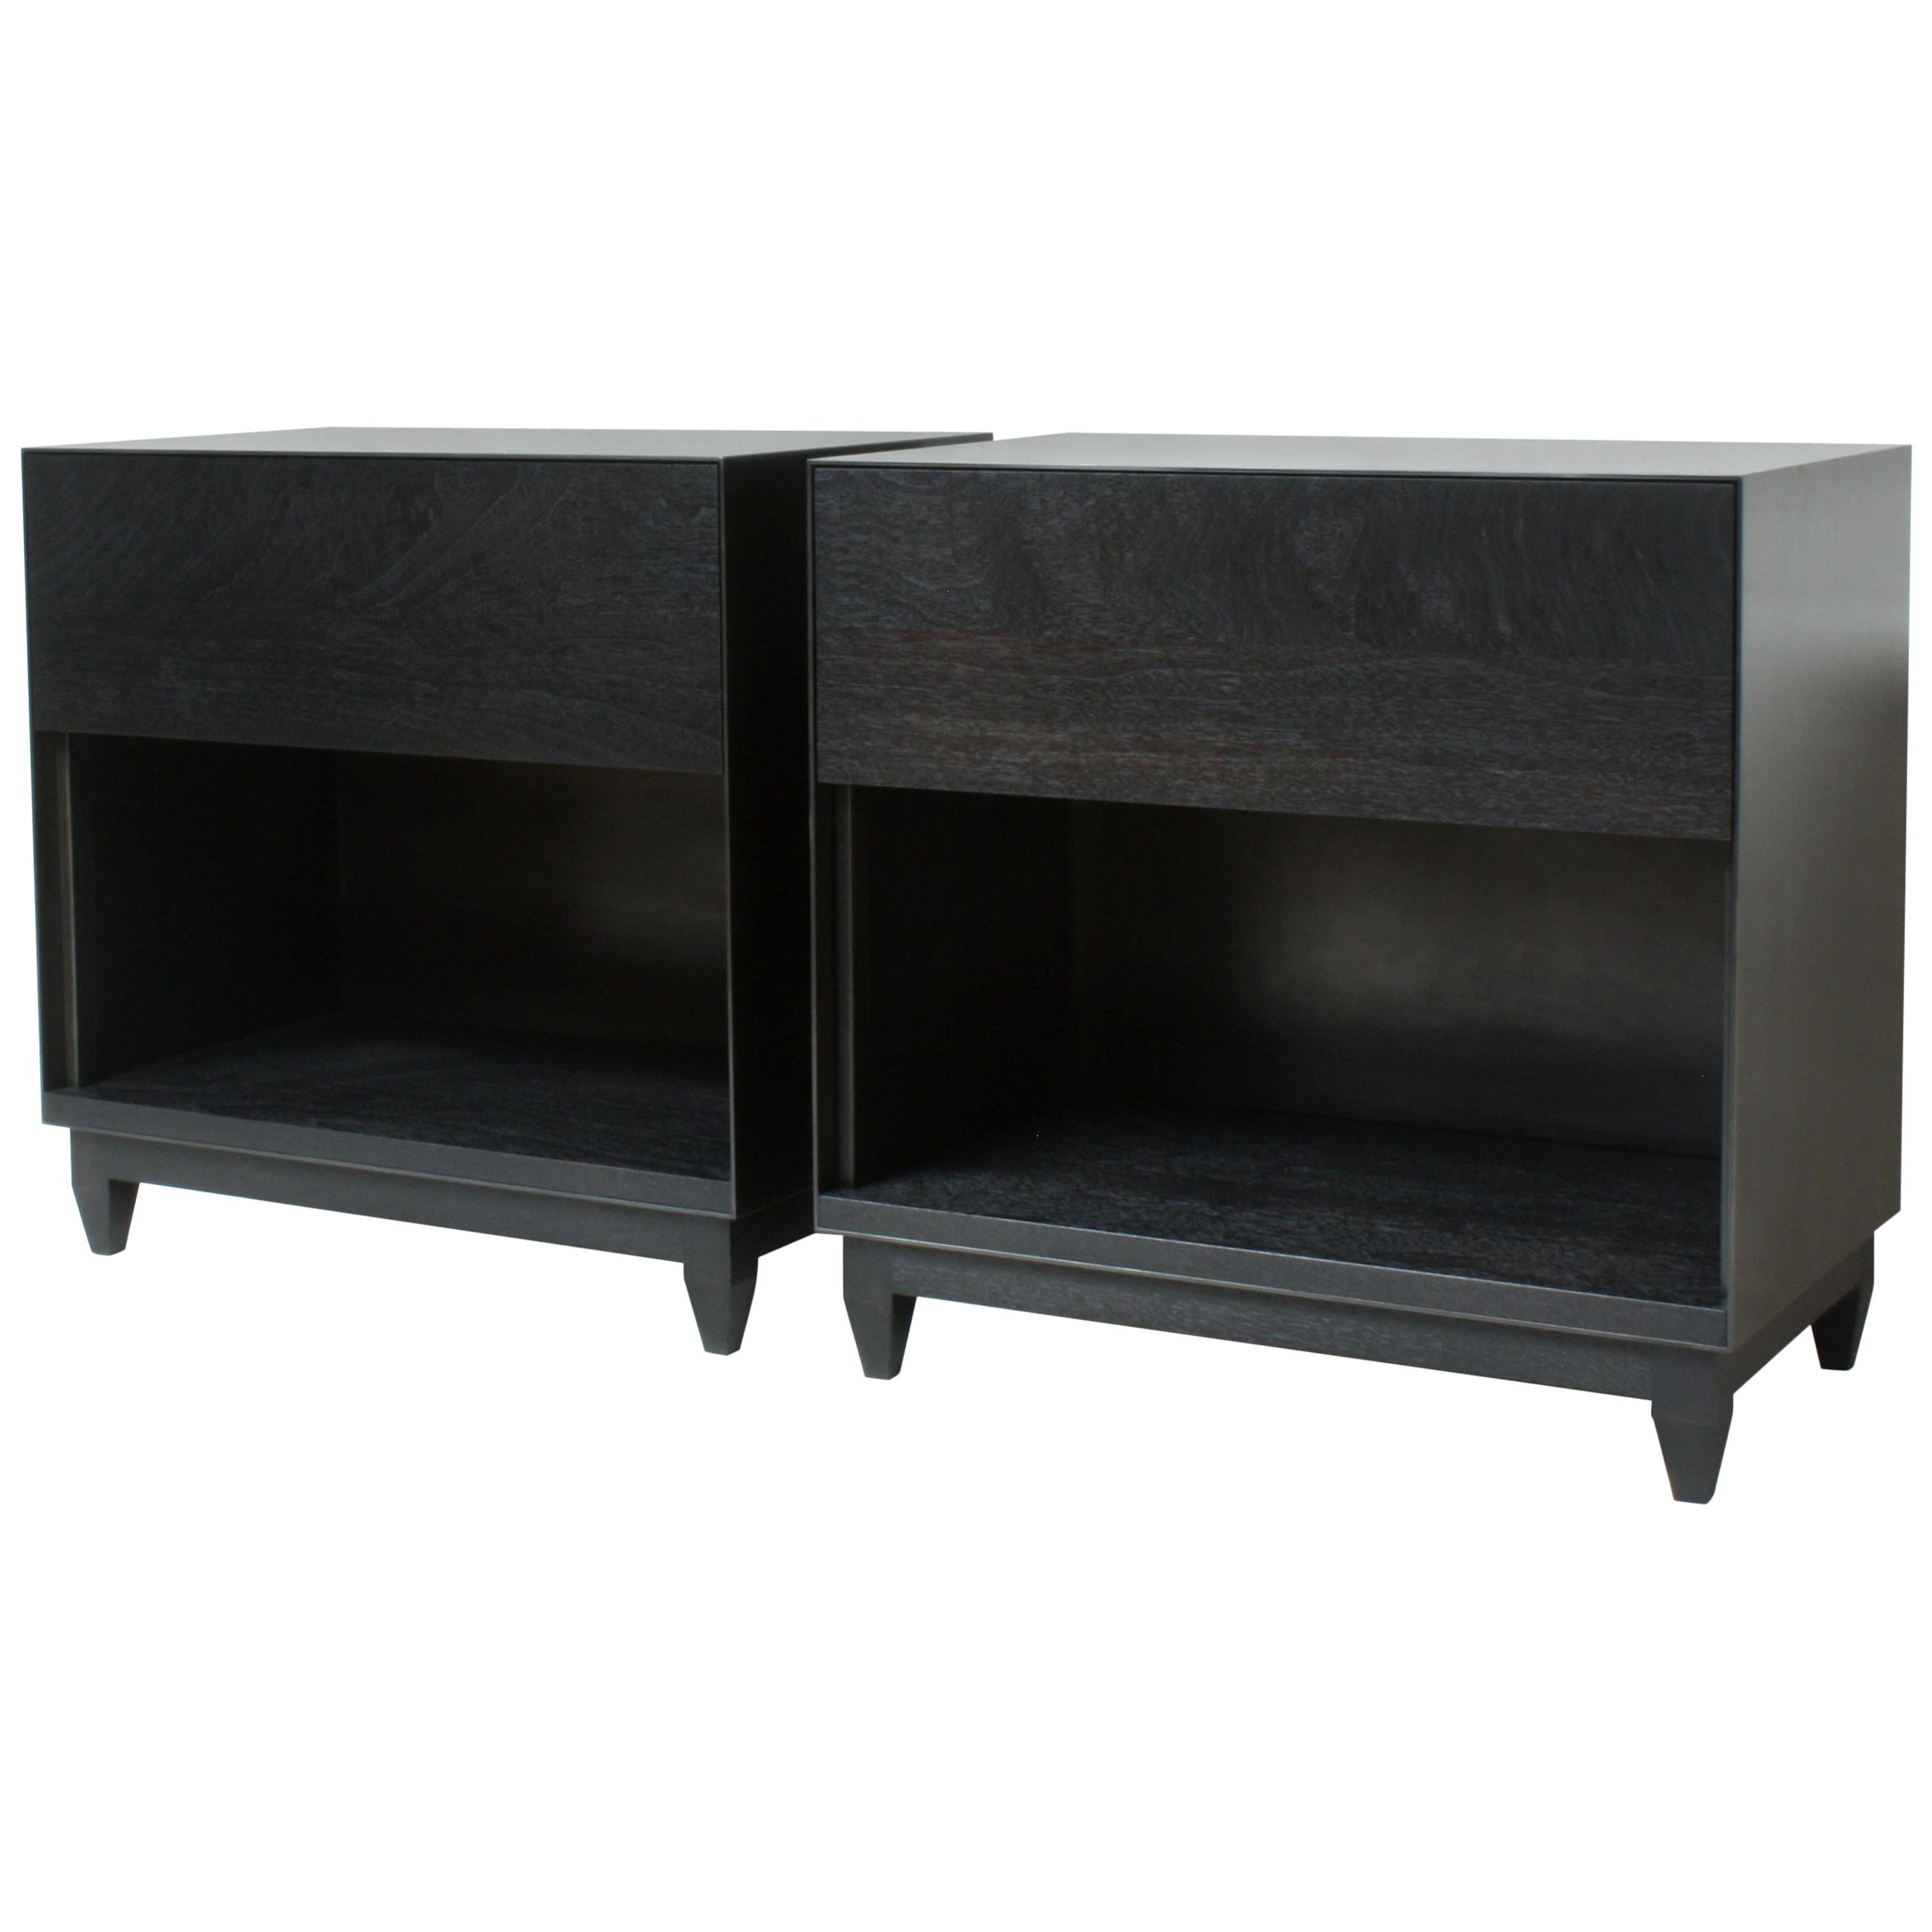 Oxide, Blackened Steel and Walnut Side Cabinets or Nightstands by Laylo Studio For Sale